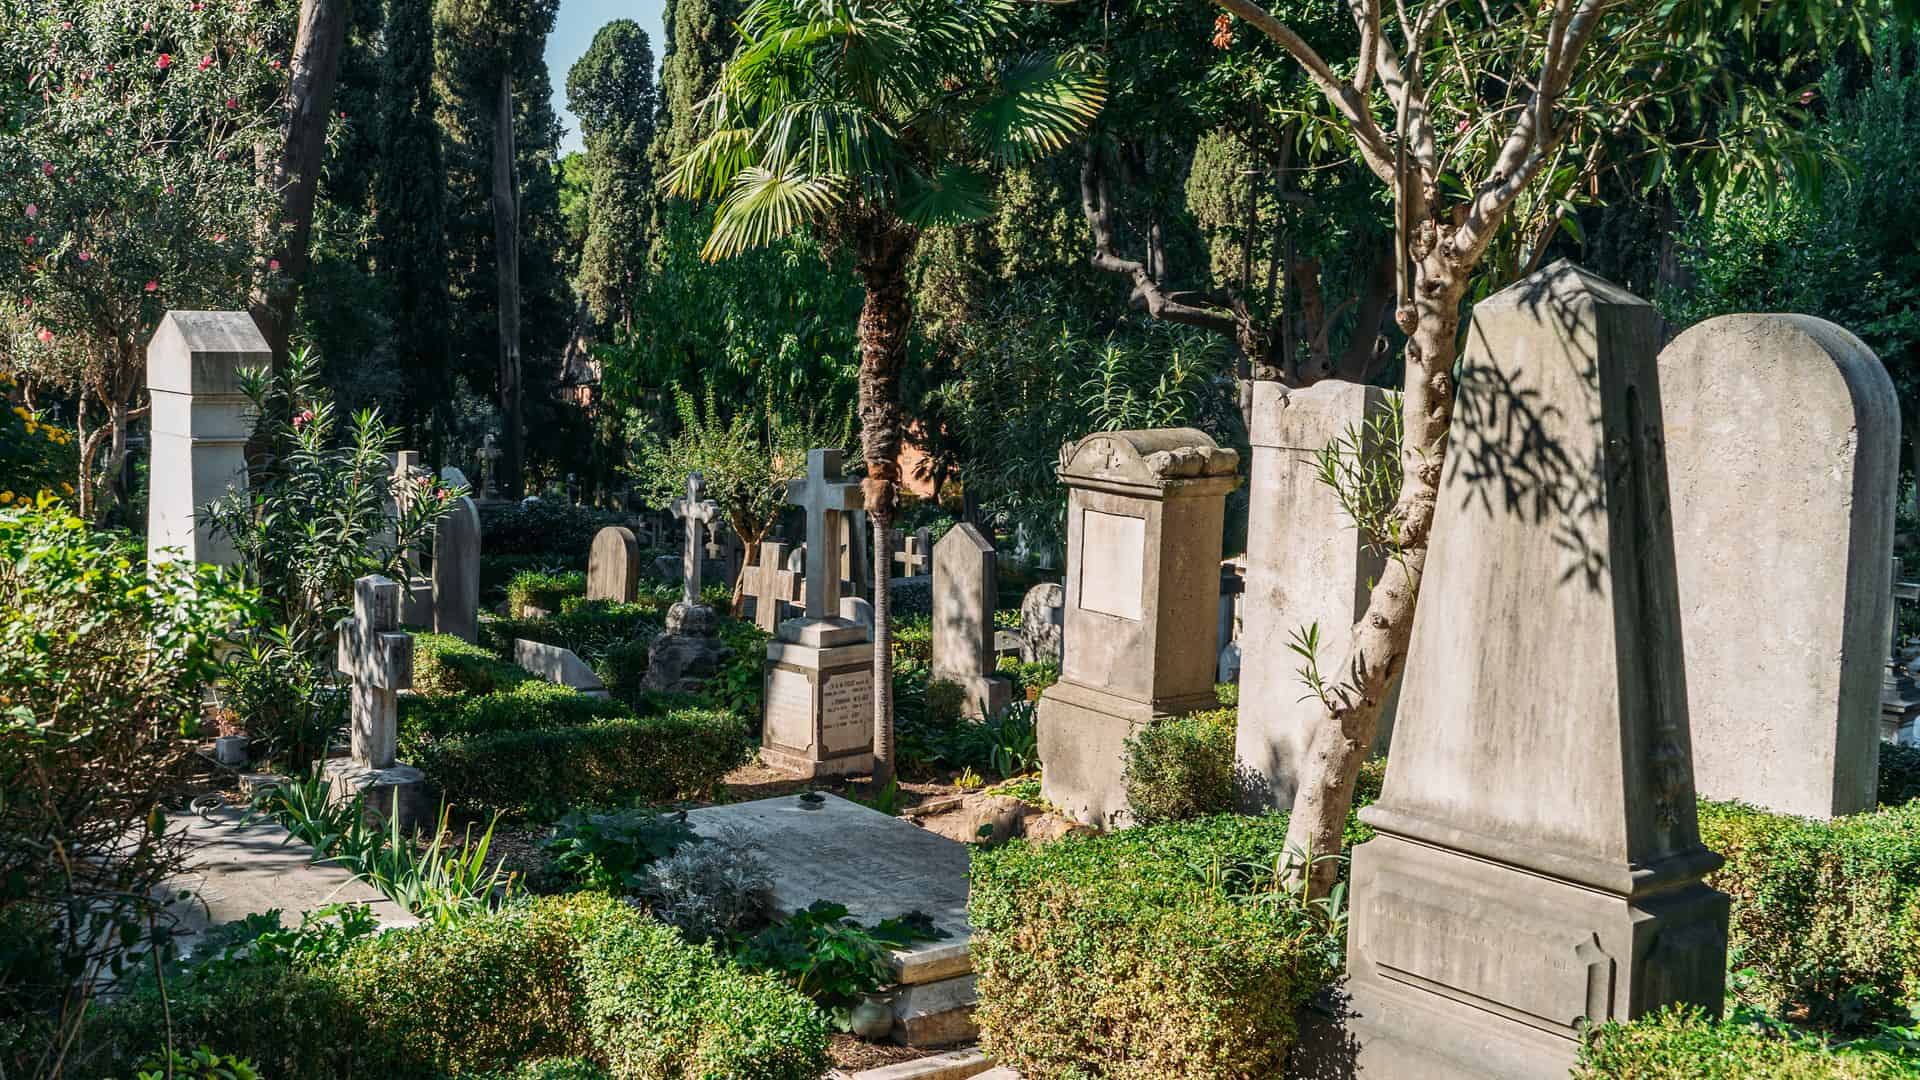 A view of the Protestant Cemetery tombstones in Rome.